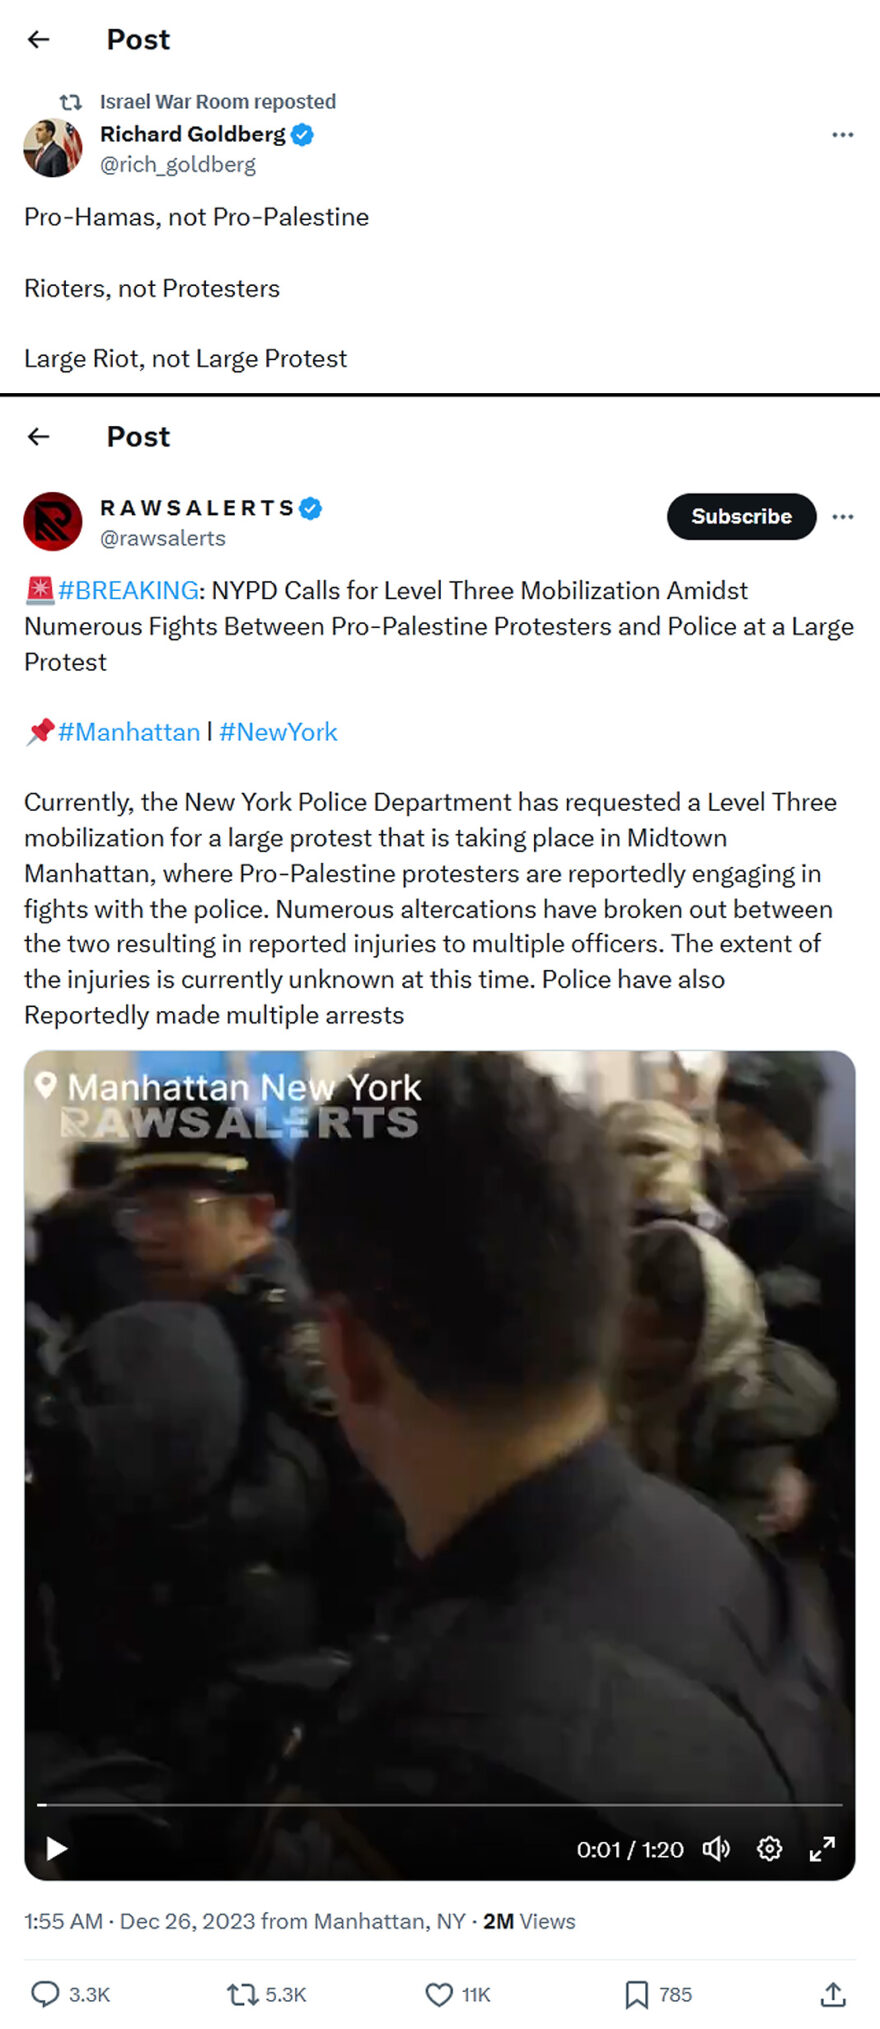 Richard Goldberg-tweet-26December2023-NYPD Calls for Level Three Mobilization Amidst Numerous Large Riots Between Pro-Hamas Rioters and Police